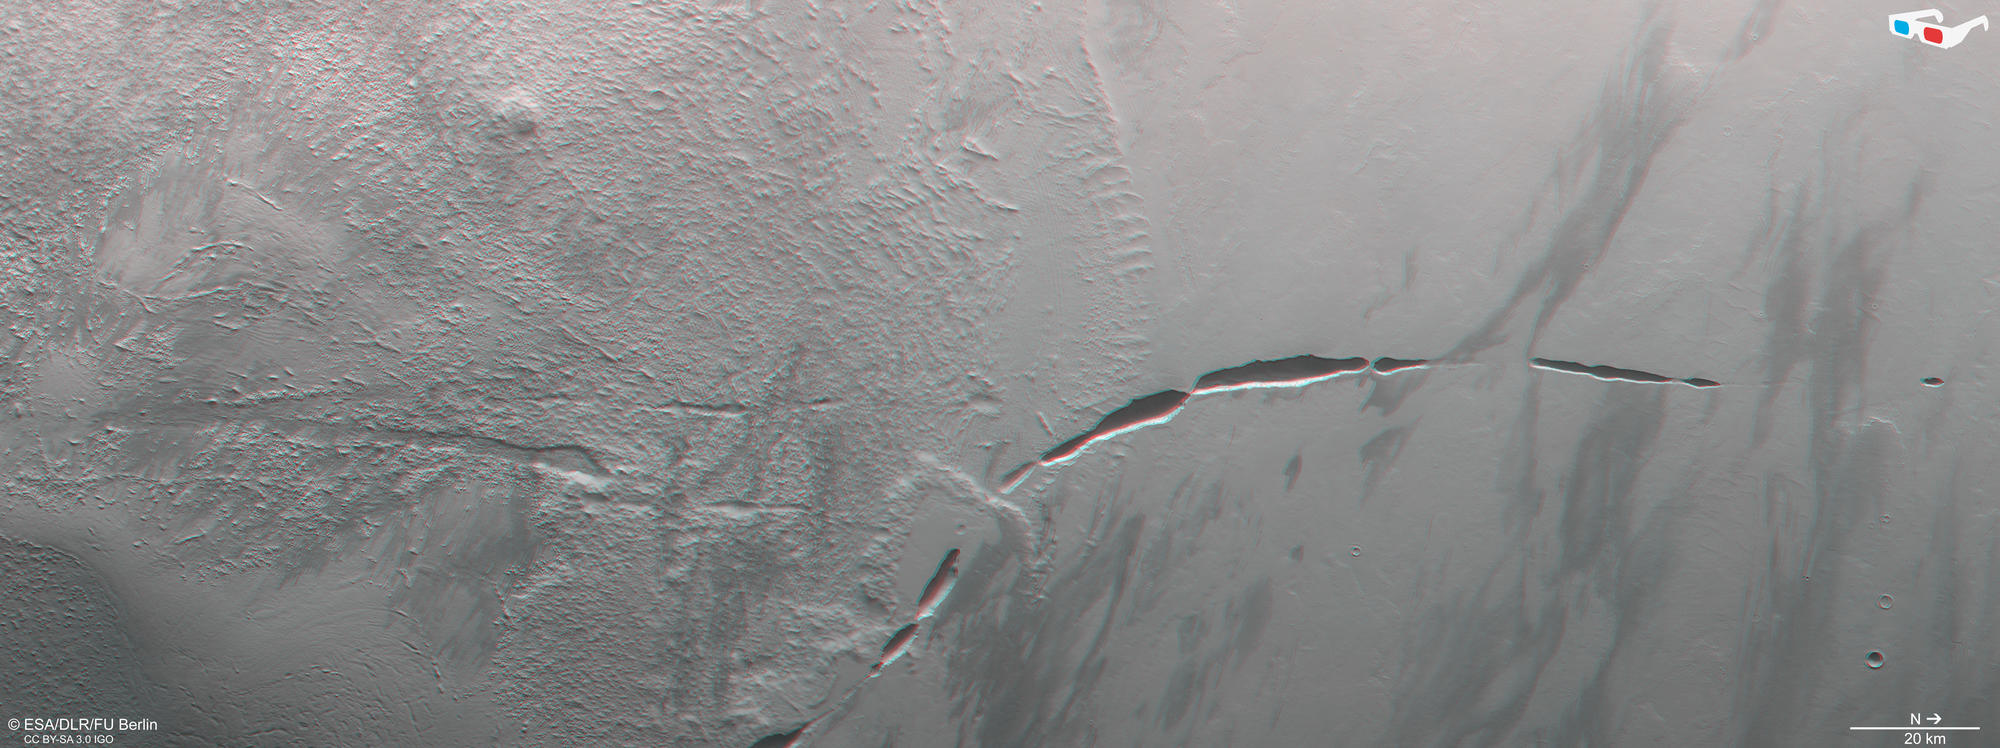 Aganippe Fossa - HRSC anaglyph